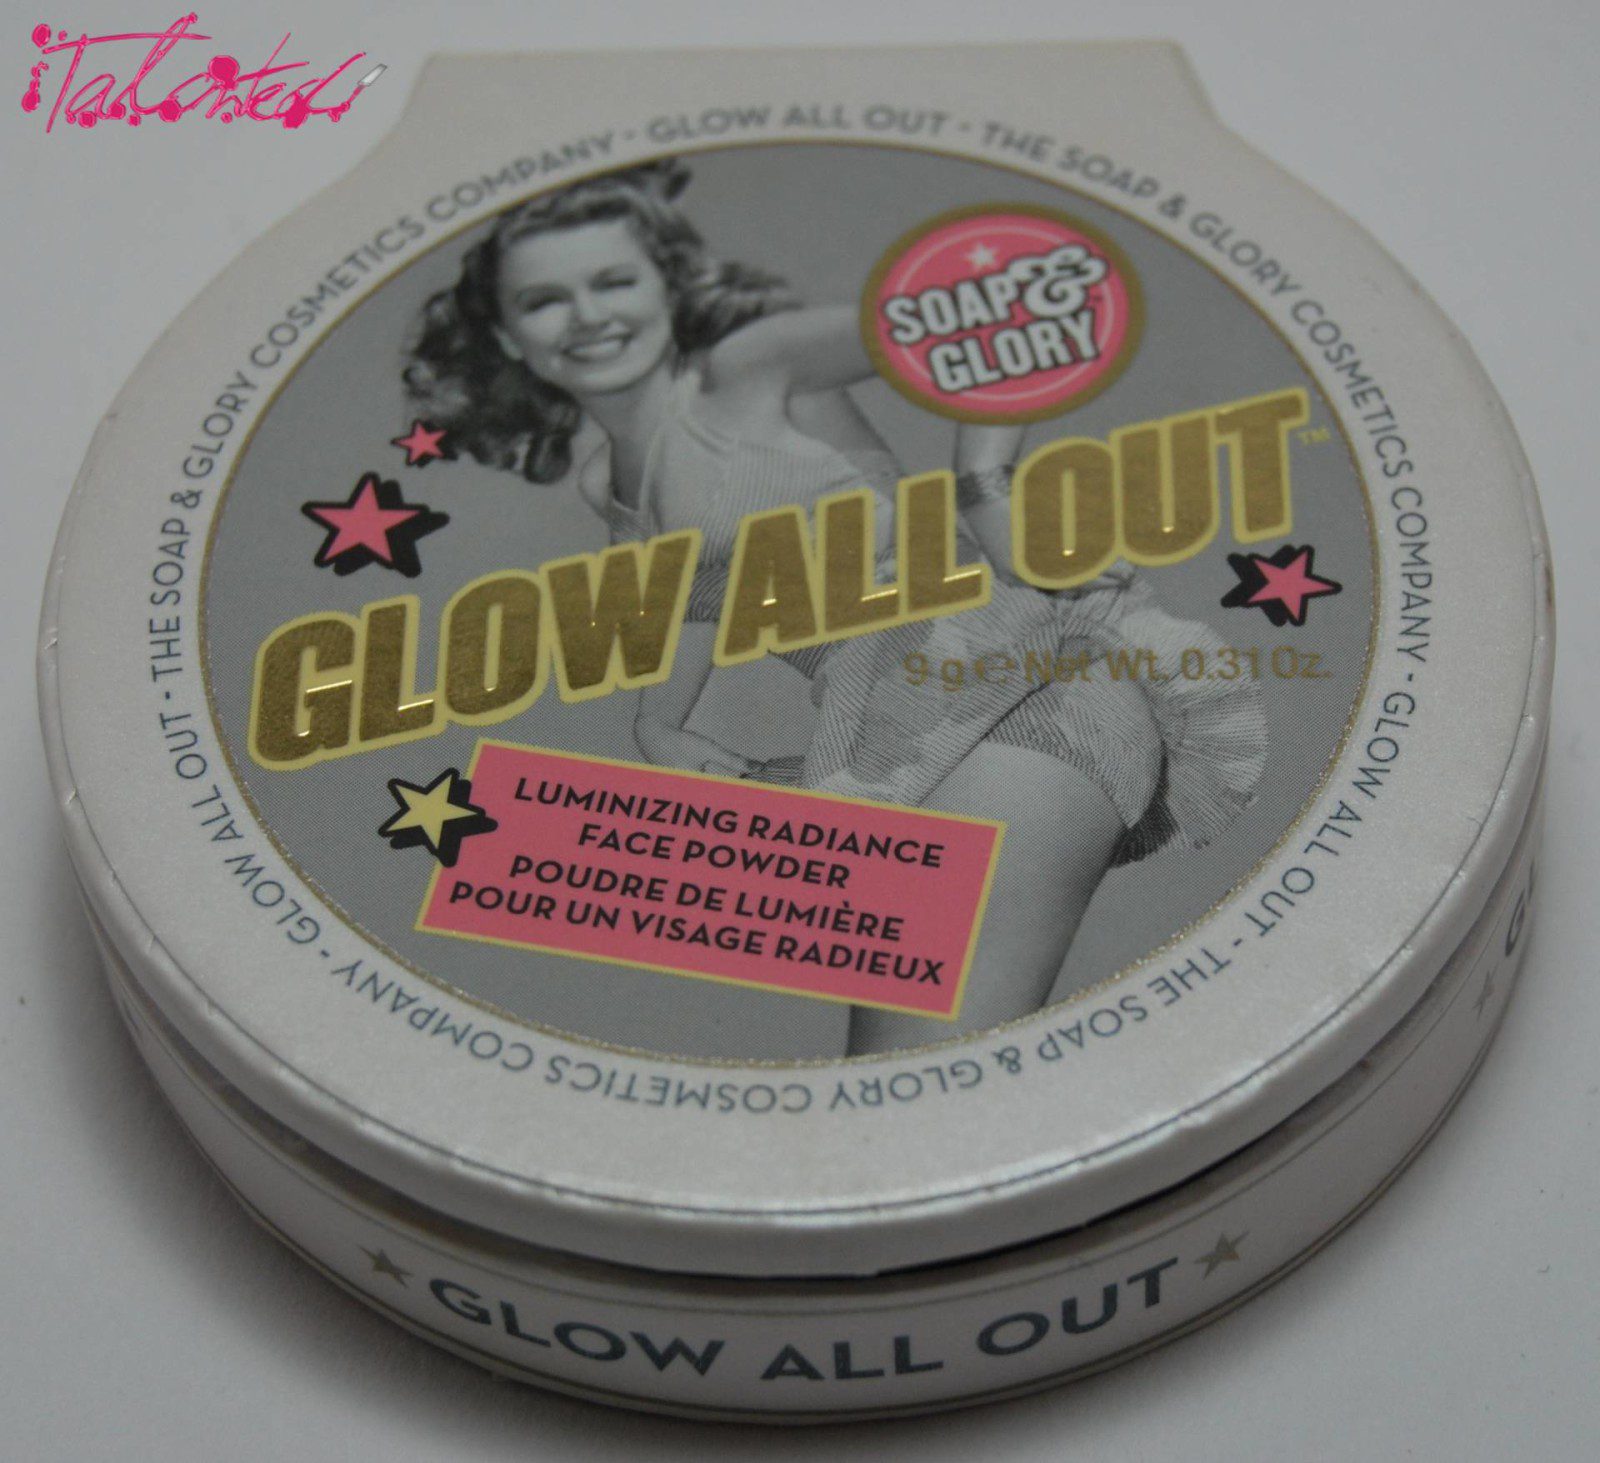 Soap and Glory Glow All Out